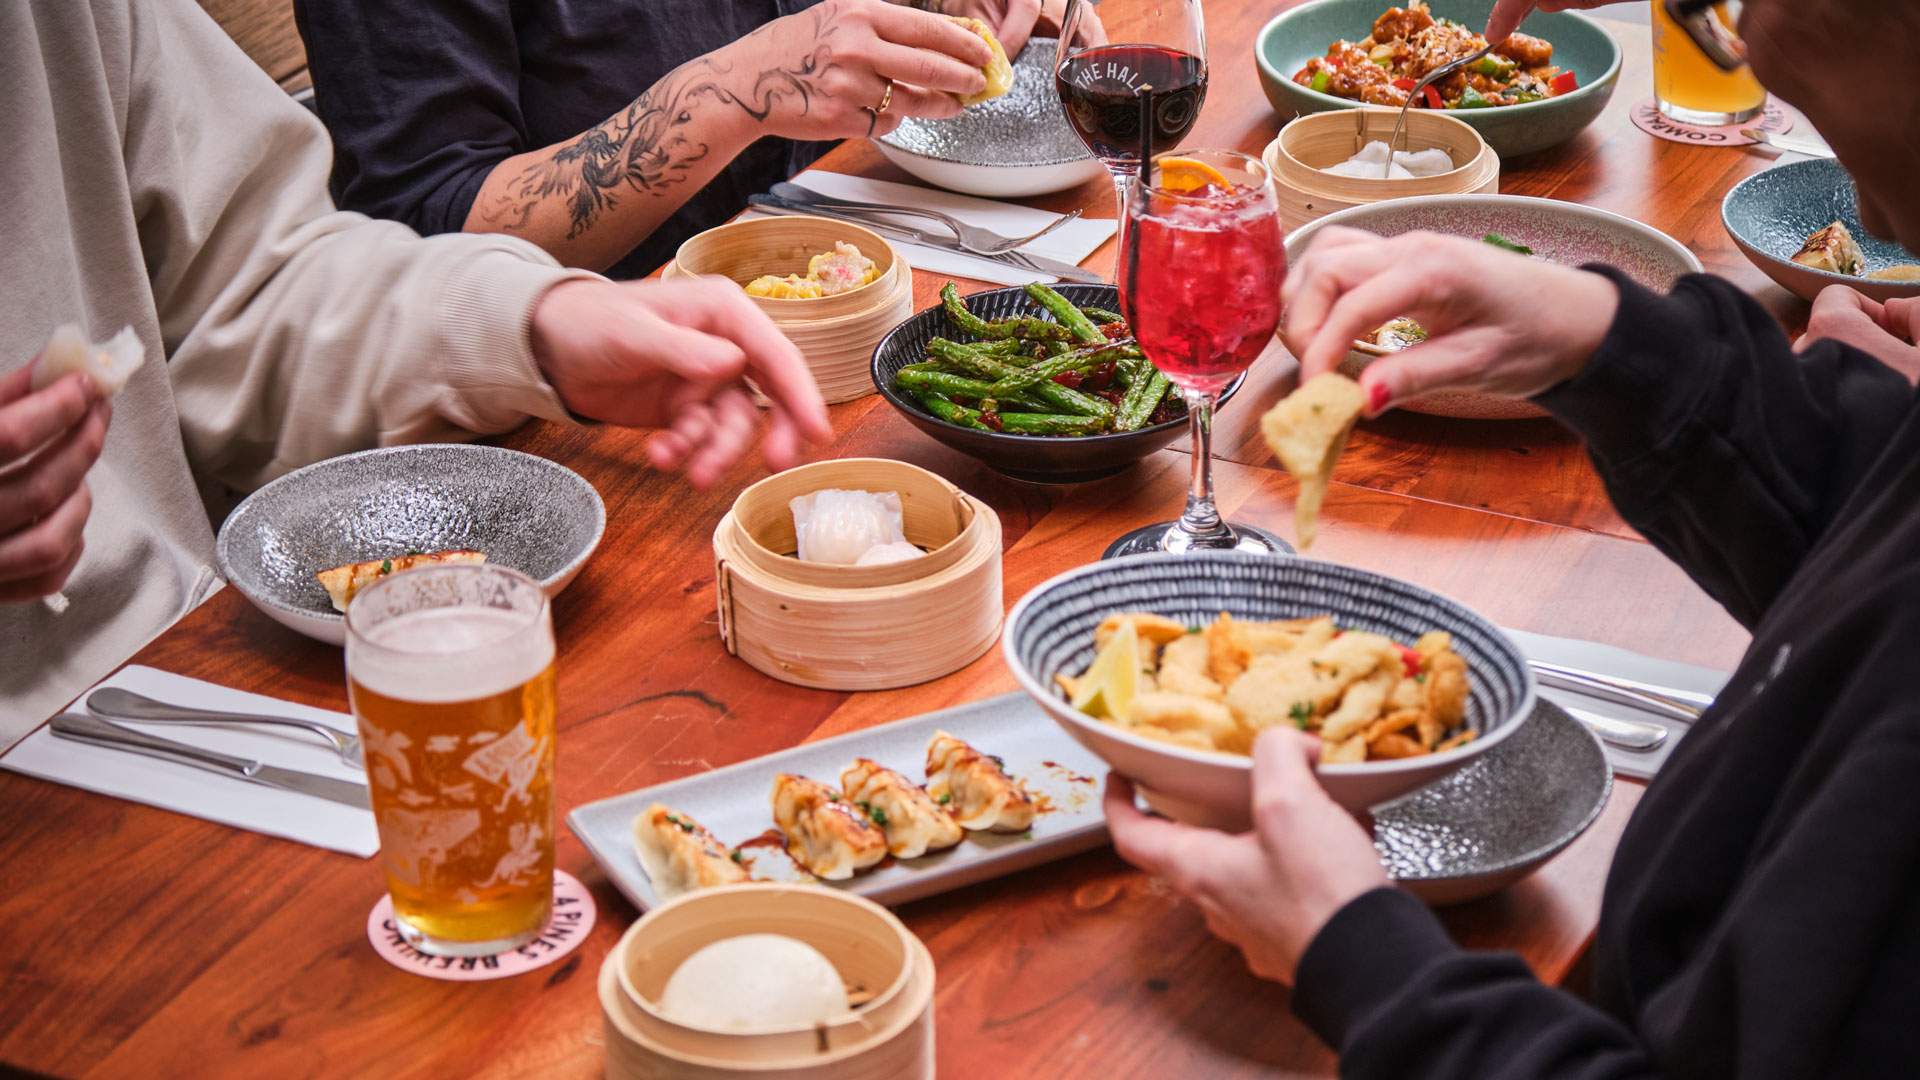 Bottomless Dumplings at Dimmy Su - one of the best things to do in Melbourne this week.